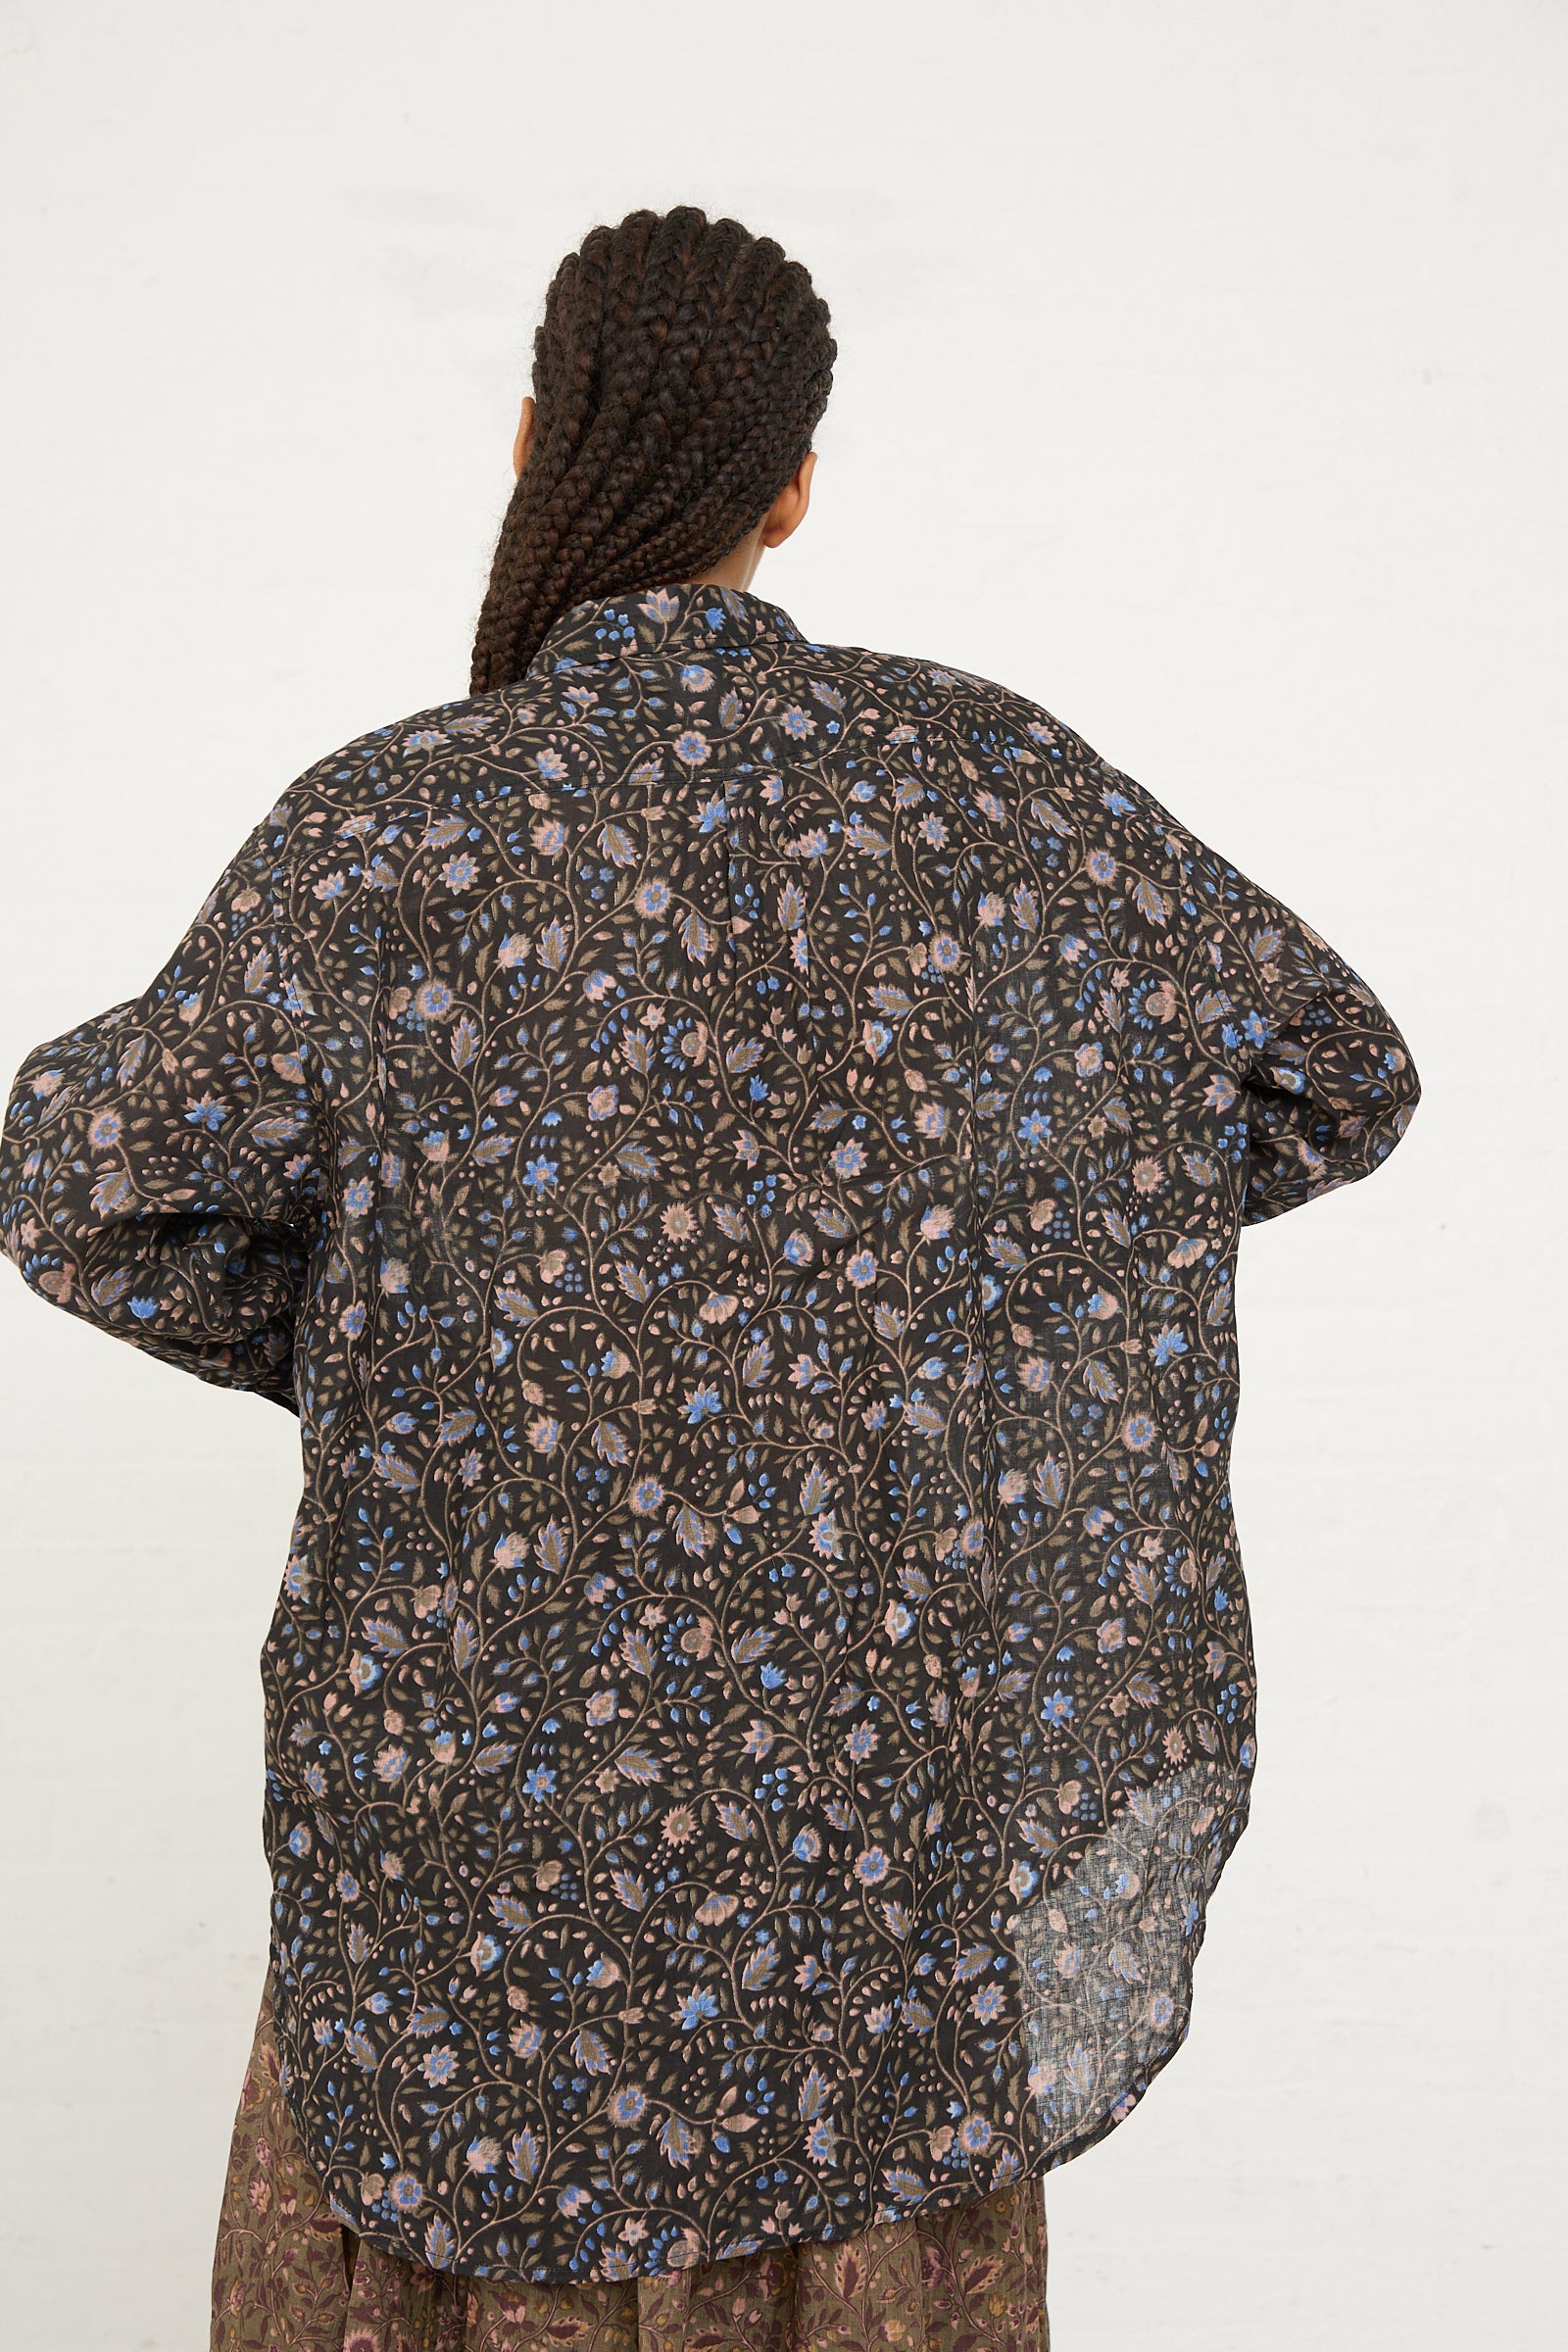 Rear view of a person wearing an Ichi Antiquités Linen Floral Shirt in Black with a braided hairstyle.